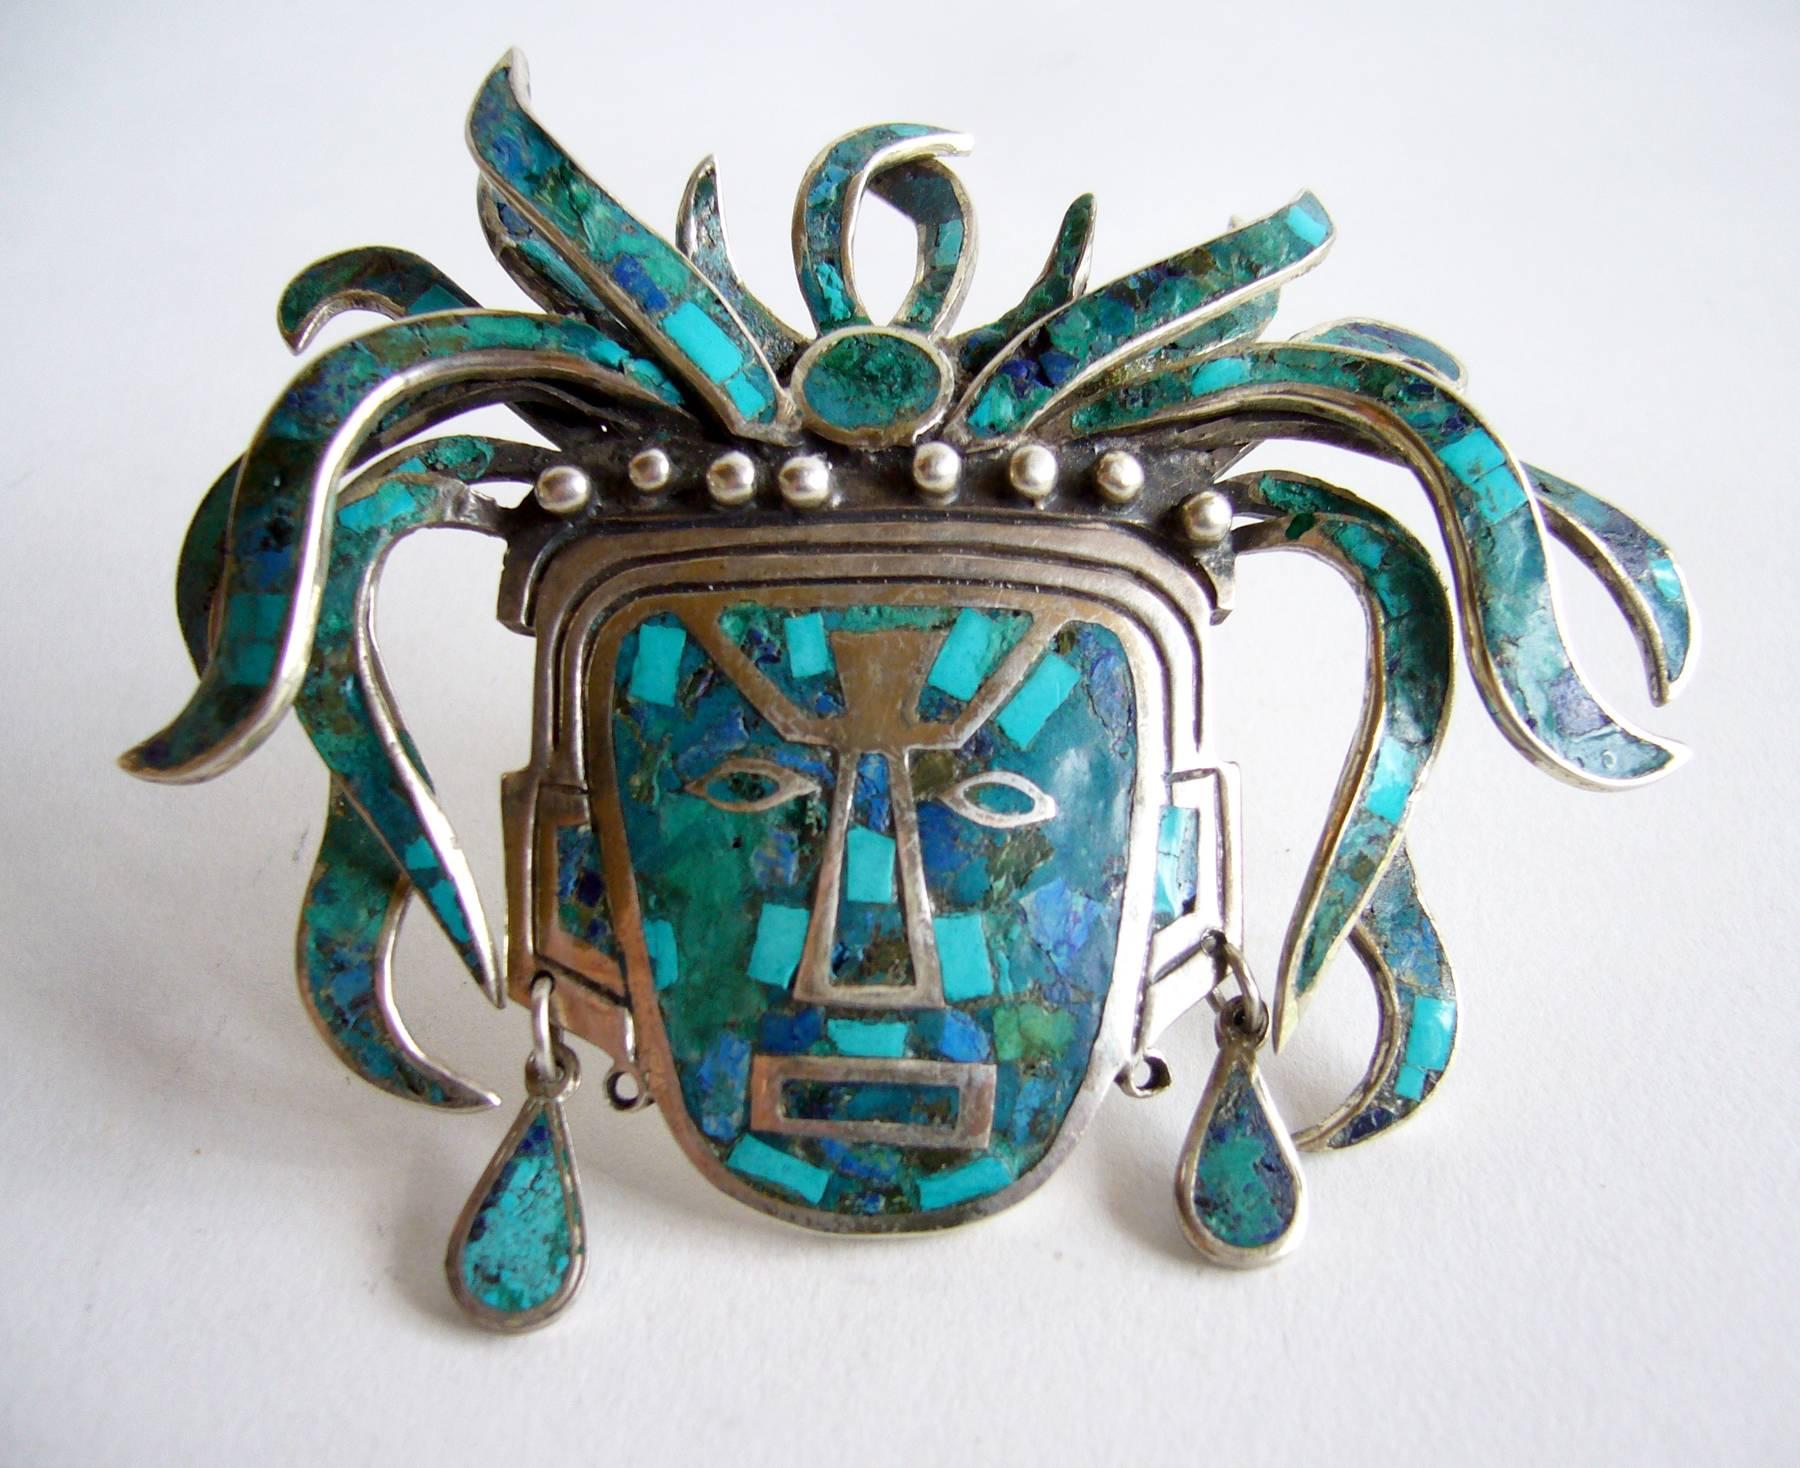 Sterling silver Mexican Aztec warrior brooch or pendant, inlaid with turquoise and lapis lazuli created by Cecilia for Toño circa 1950's.  Piece measures 3